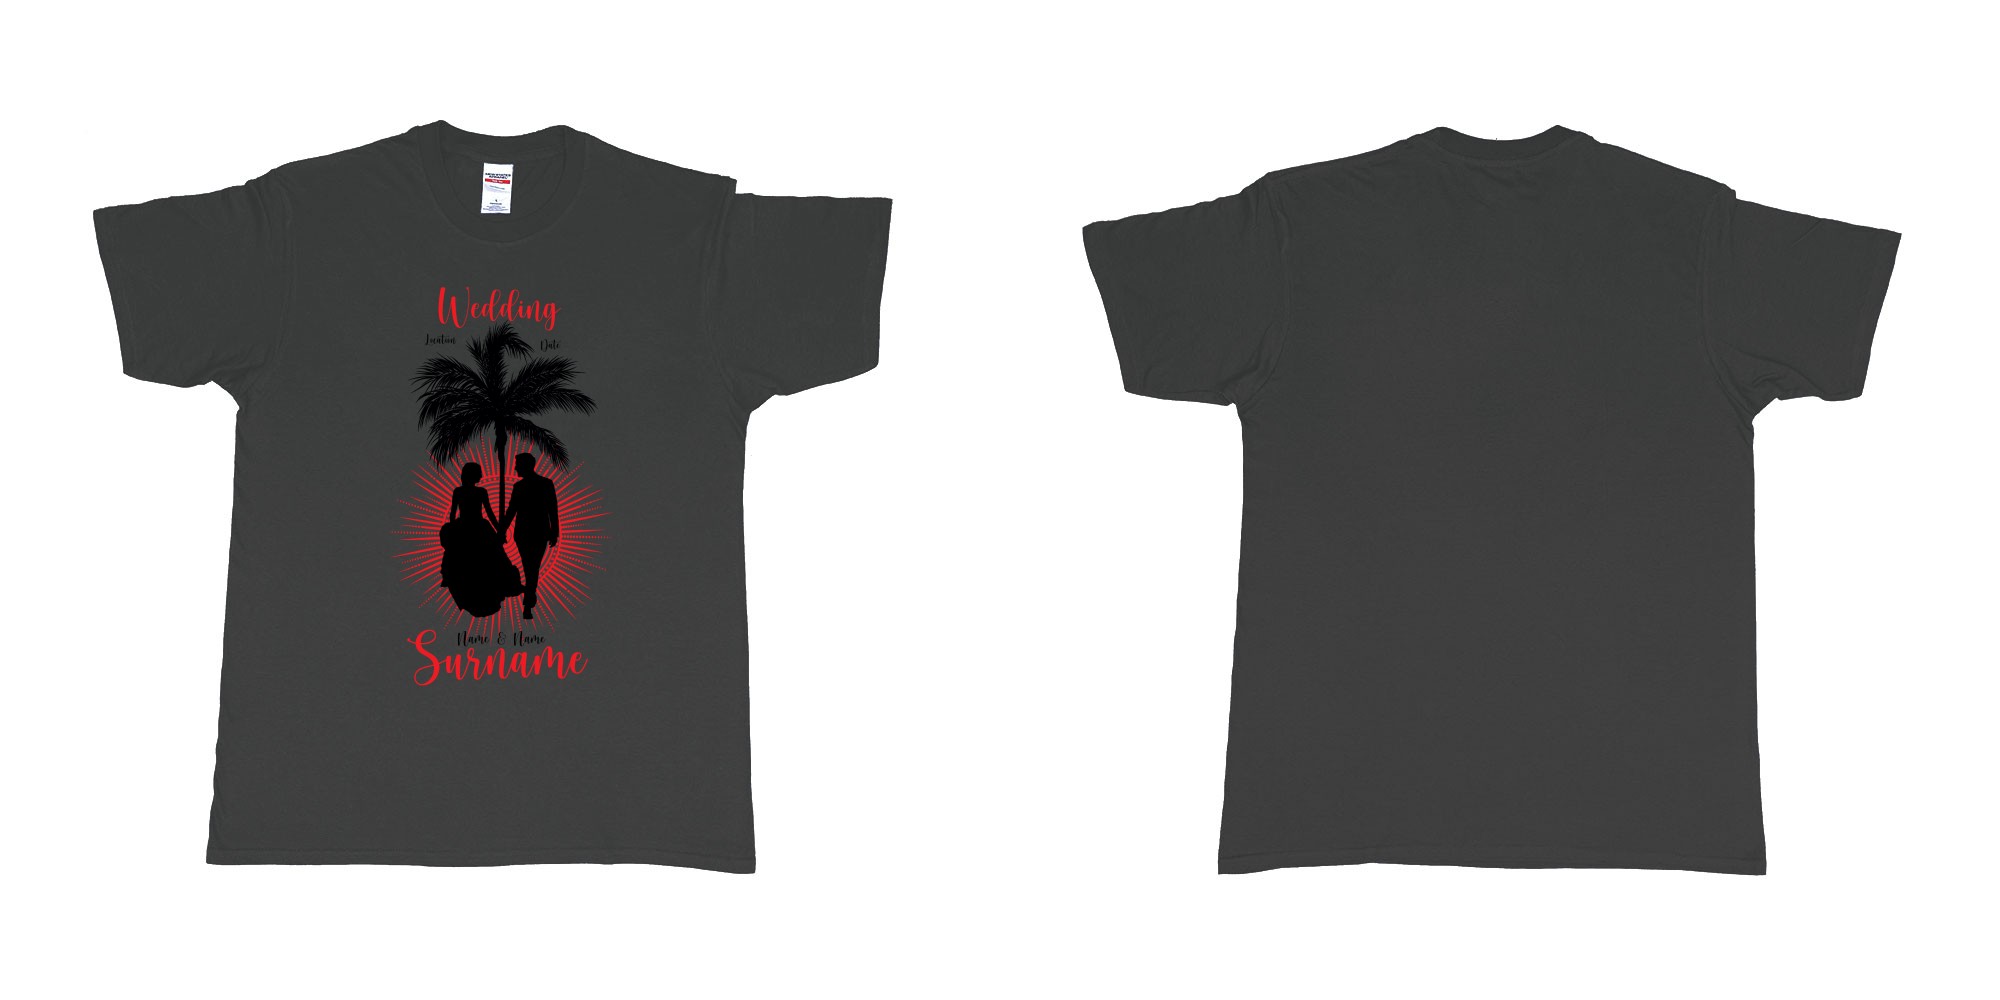 Custom tshirt design wedding palm sun bali in fabric color black choice your own text made in Bali by The Pirate Way